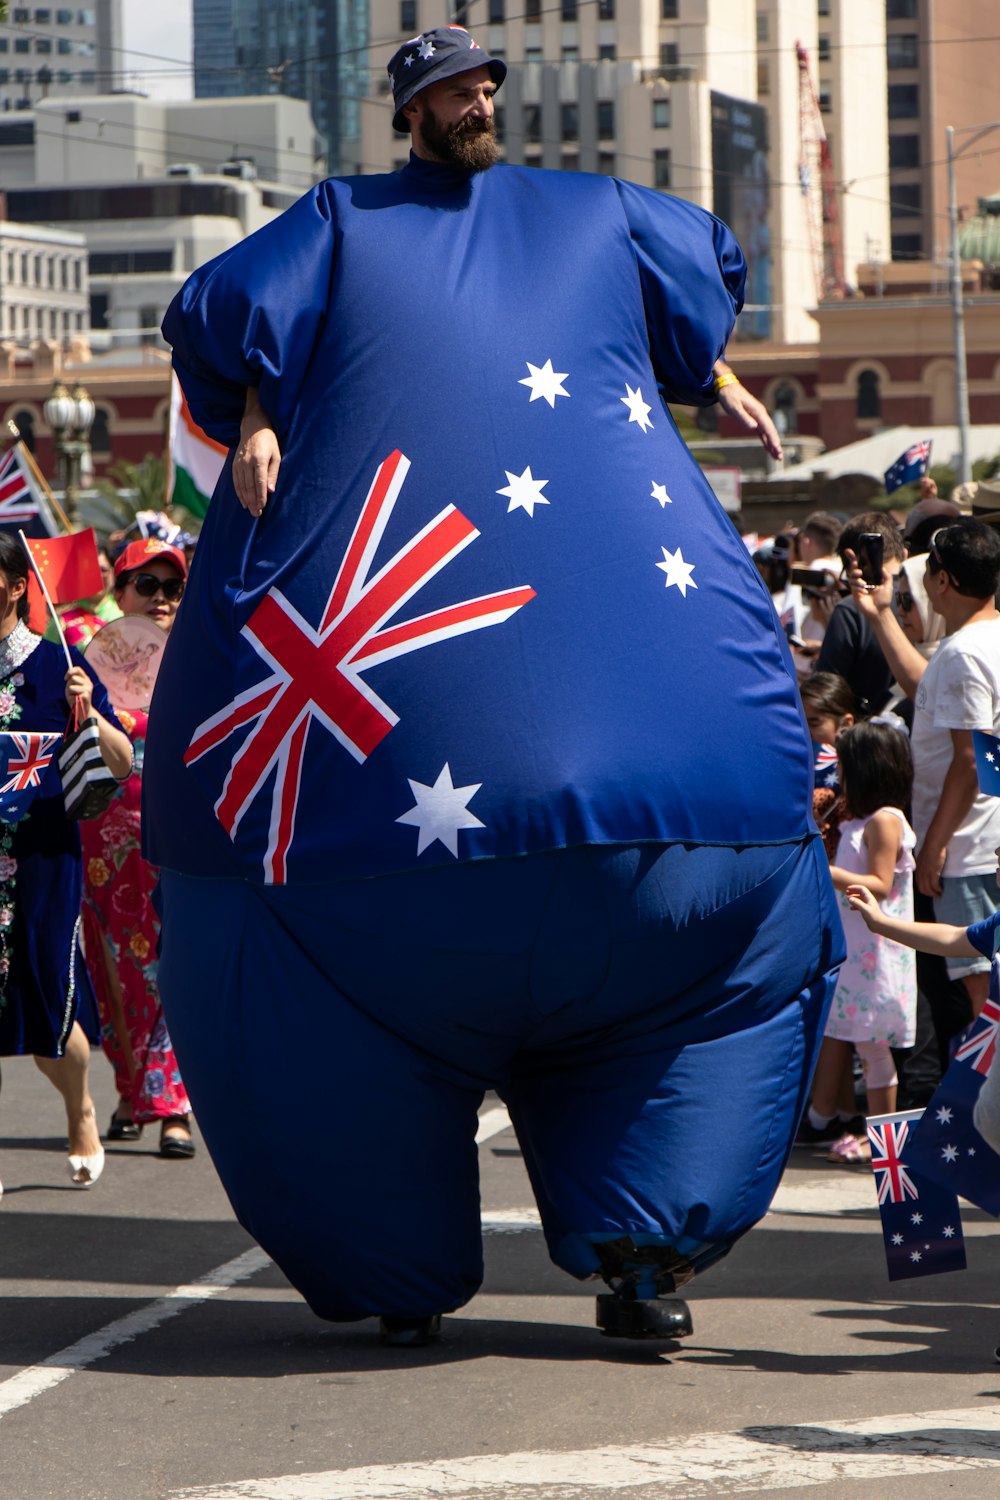 a man in an inflatable costume walking down a street